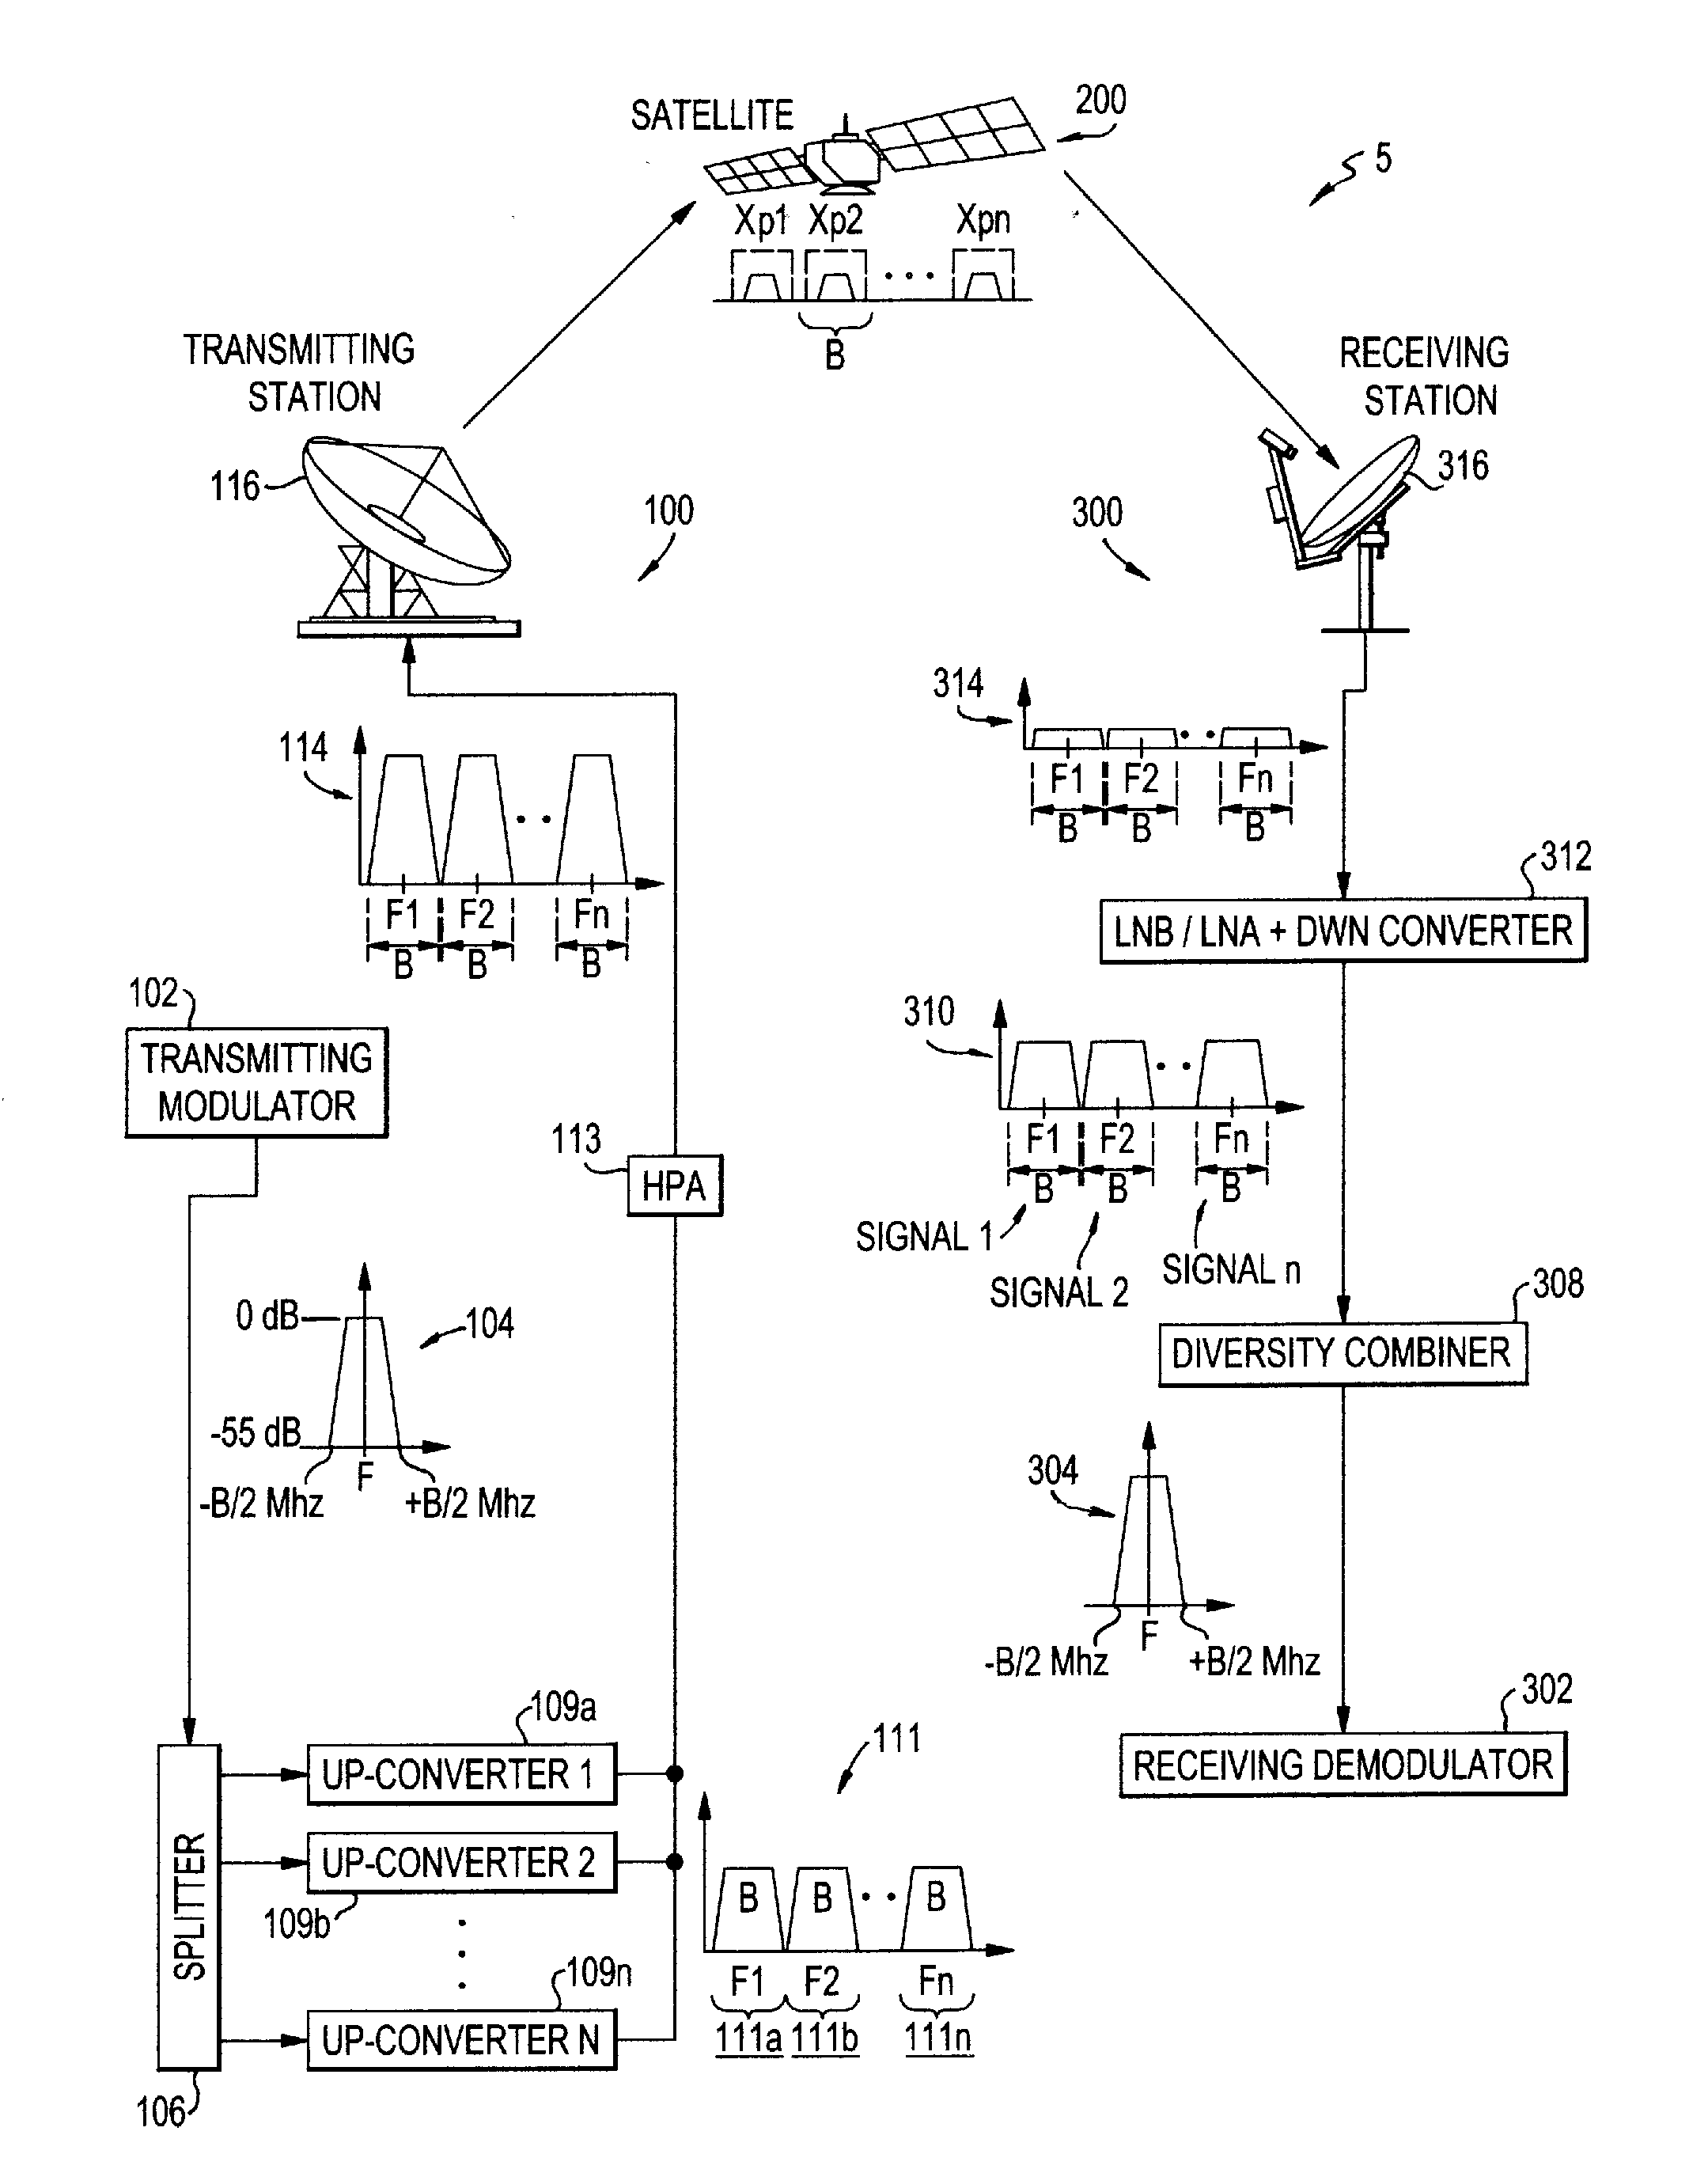 System and method for enabling ultra small aperture communication antenna using spectral replication and coherent frequency and phase combining